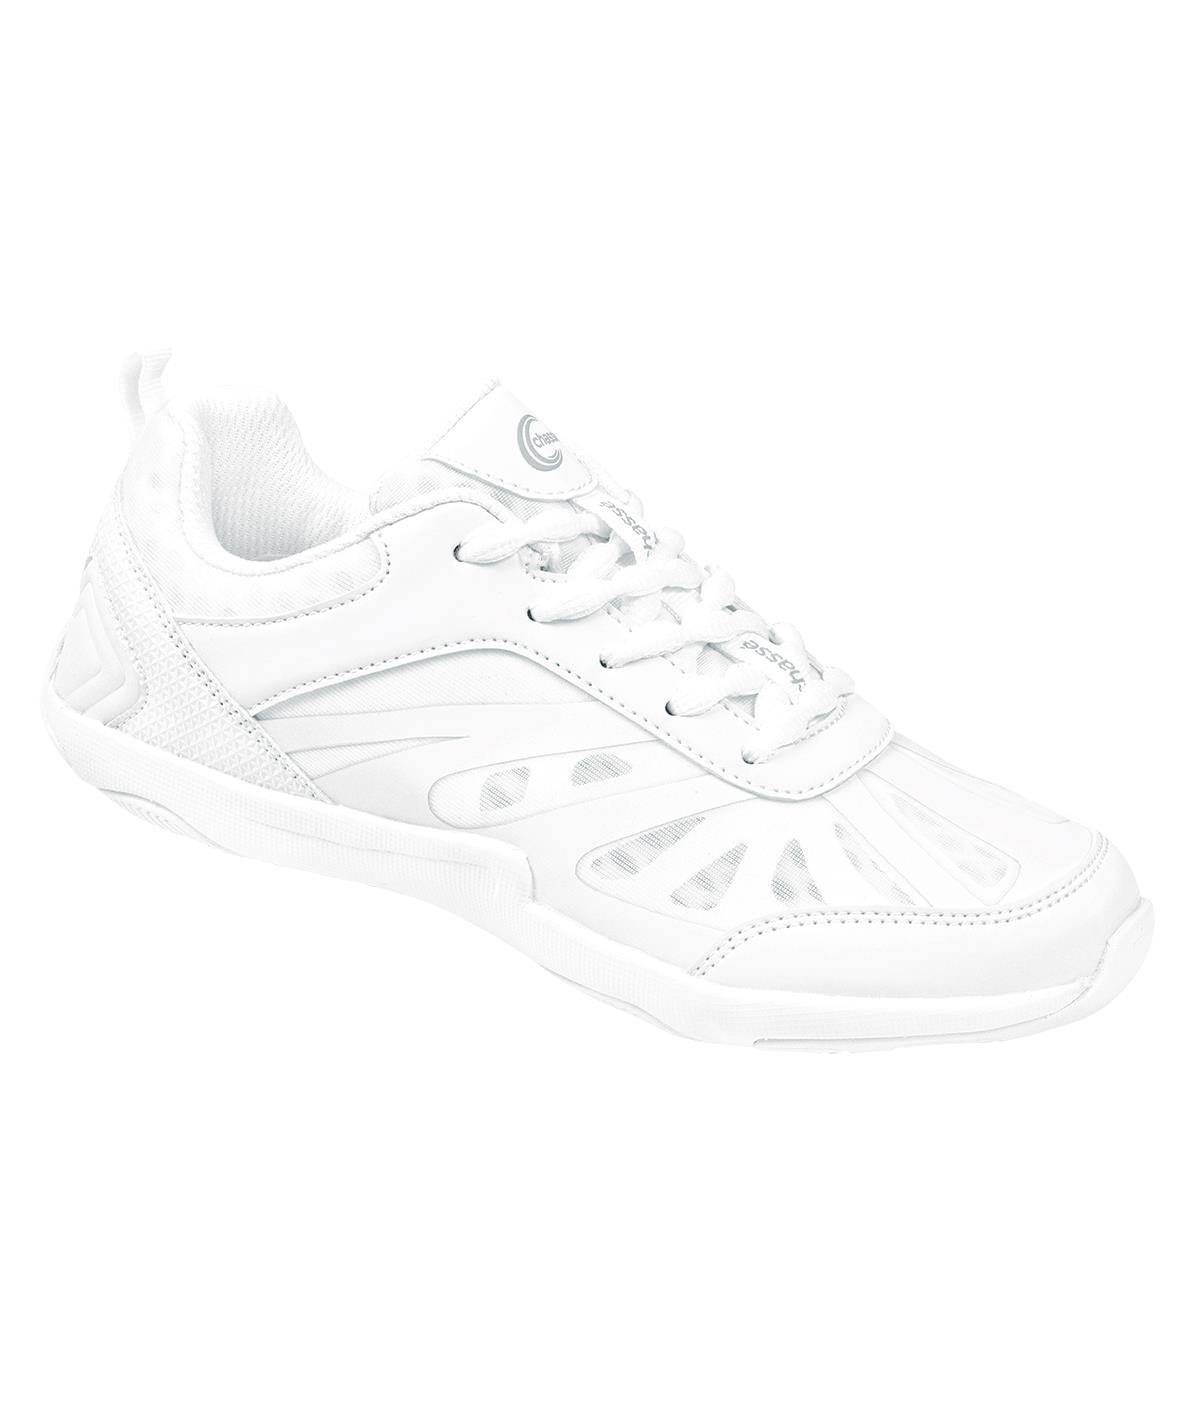 clearance cheer shoes